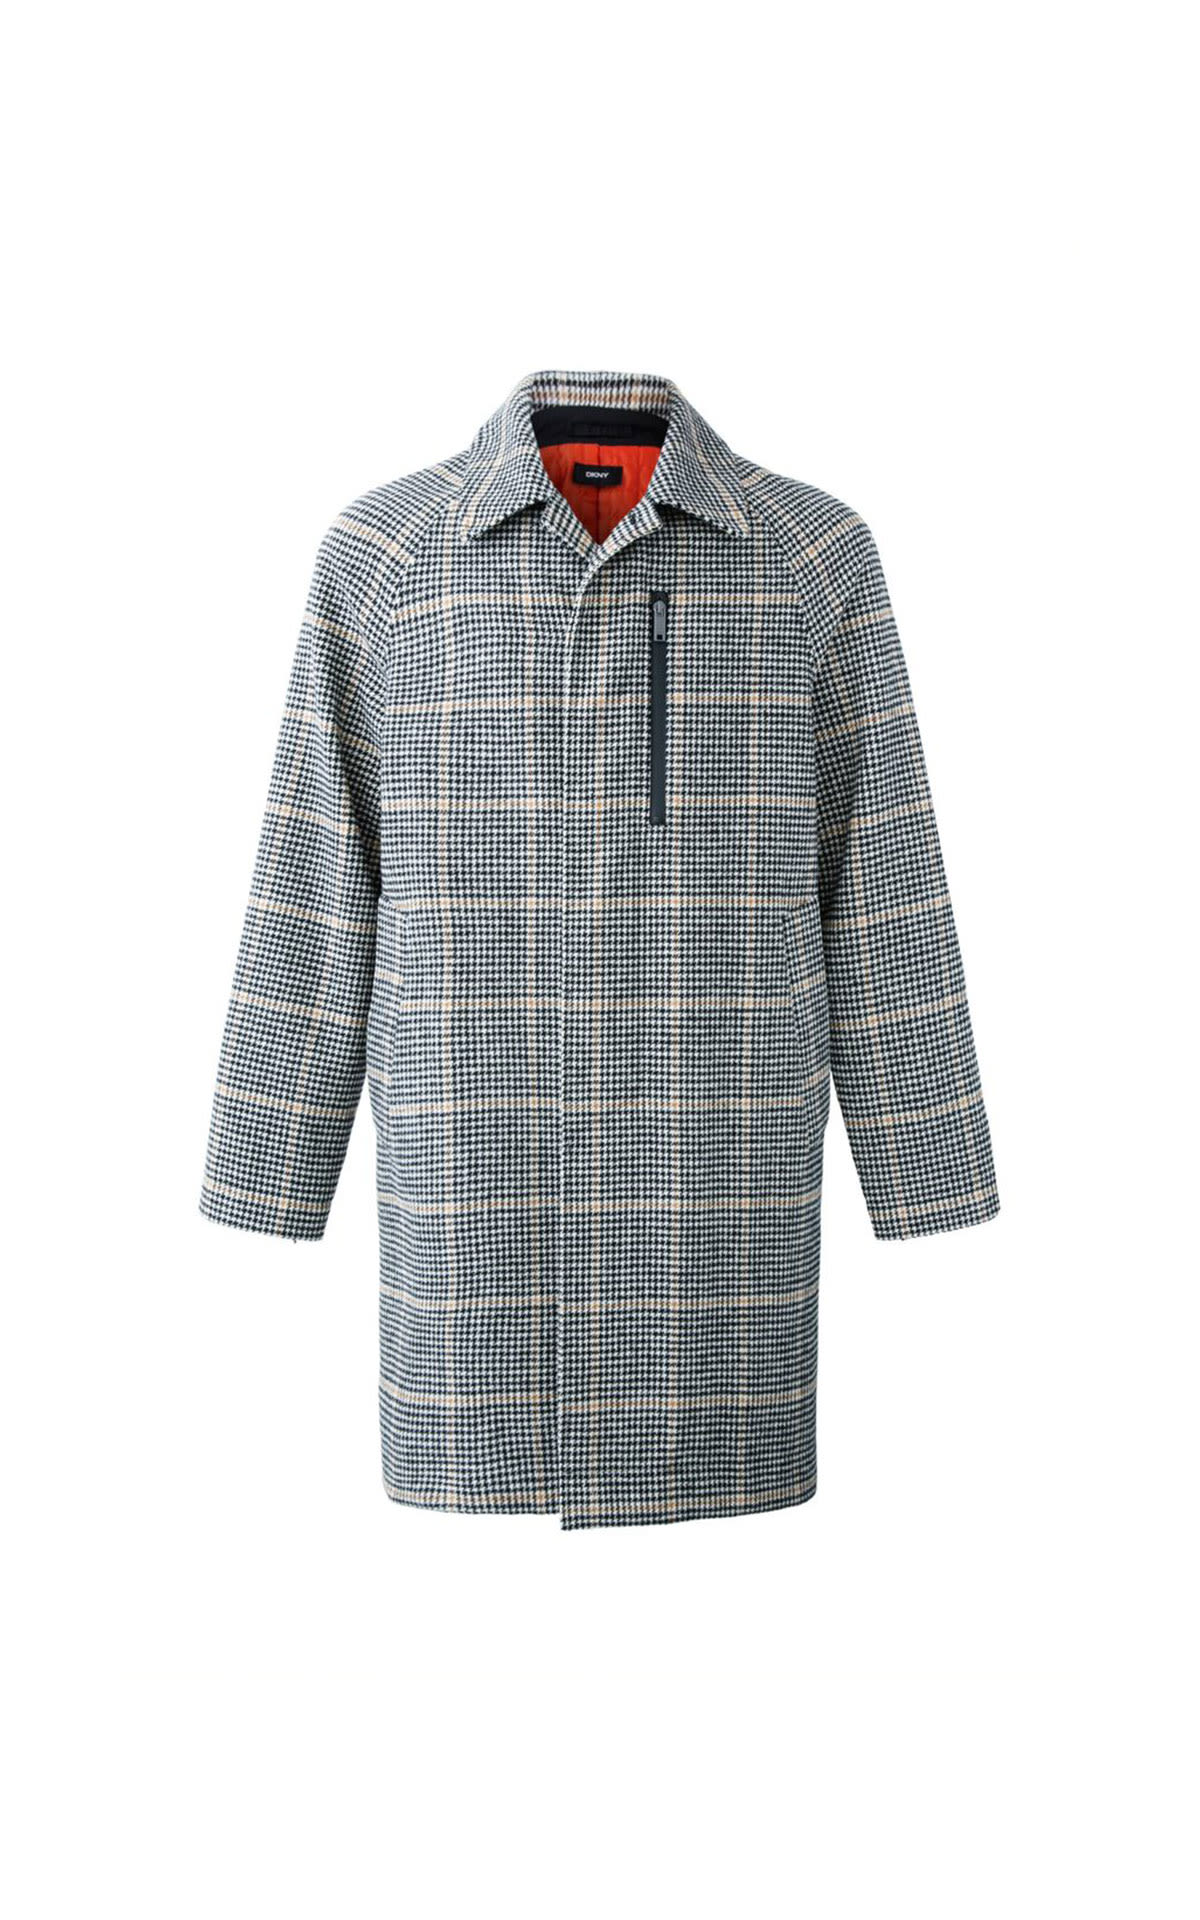 DKNY Bonded backing plaid shirt jacket from Bicester Village